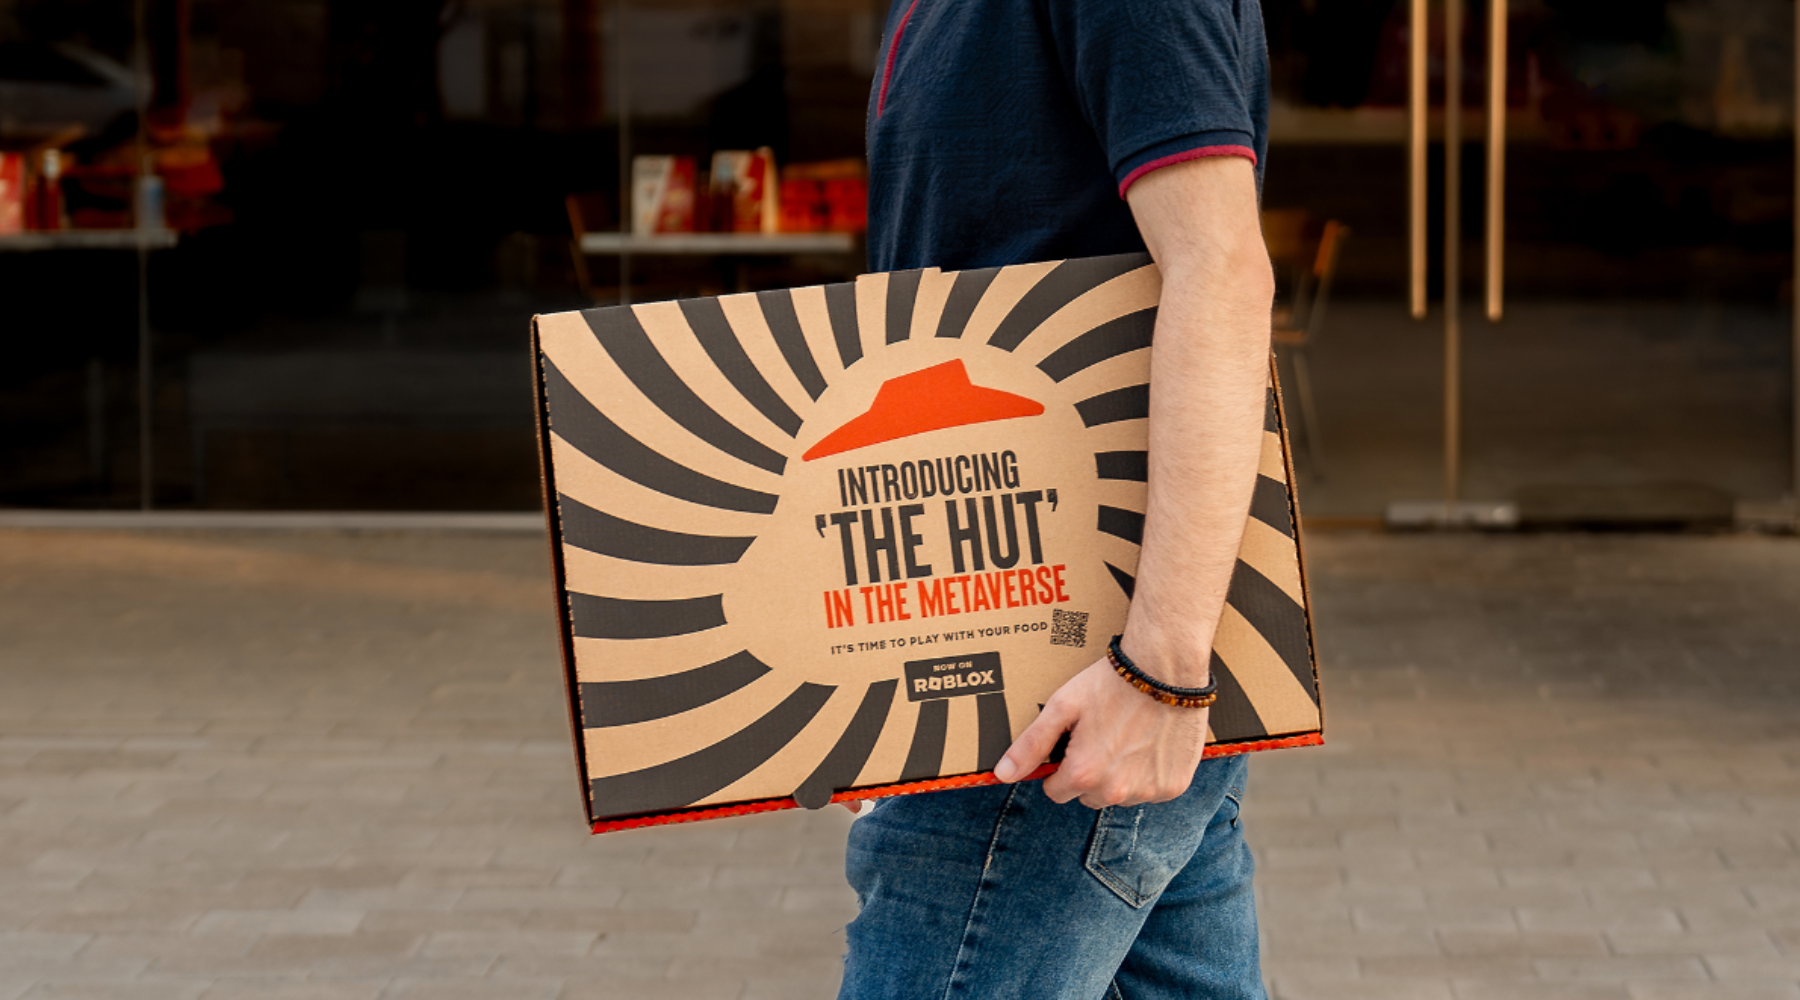 The Pizza Hut Back-to-School Campaign Keeps the Summer Fun Alive